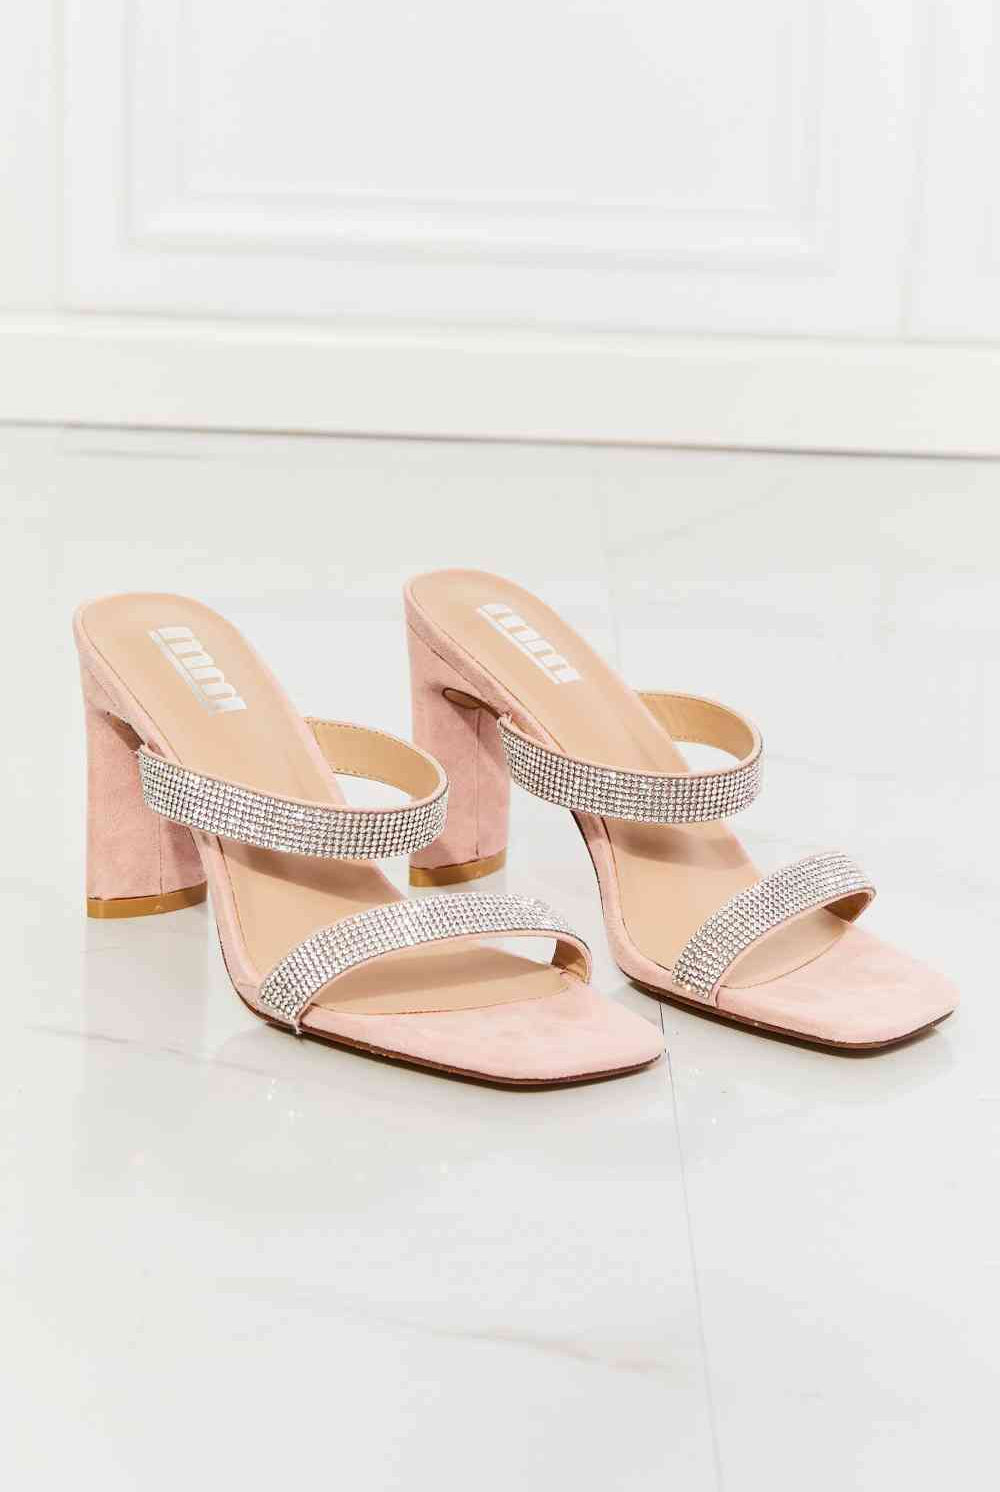 Antique White MMShoes Leave A Little Sparkle Rhinestone Block Heel Sandal in Pink Shoes